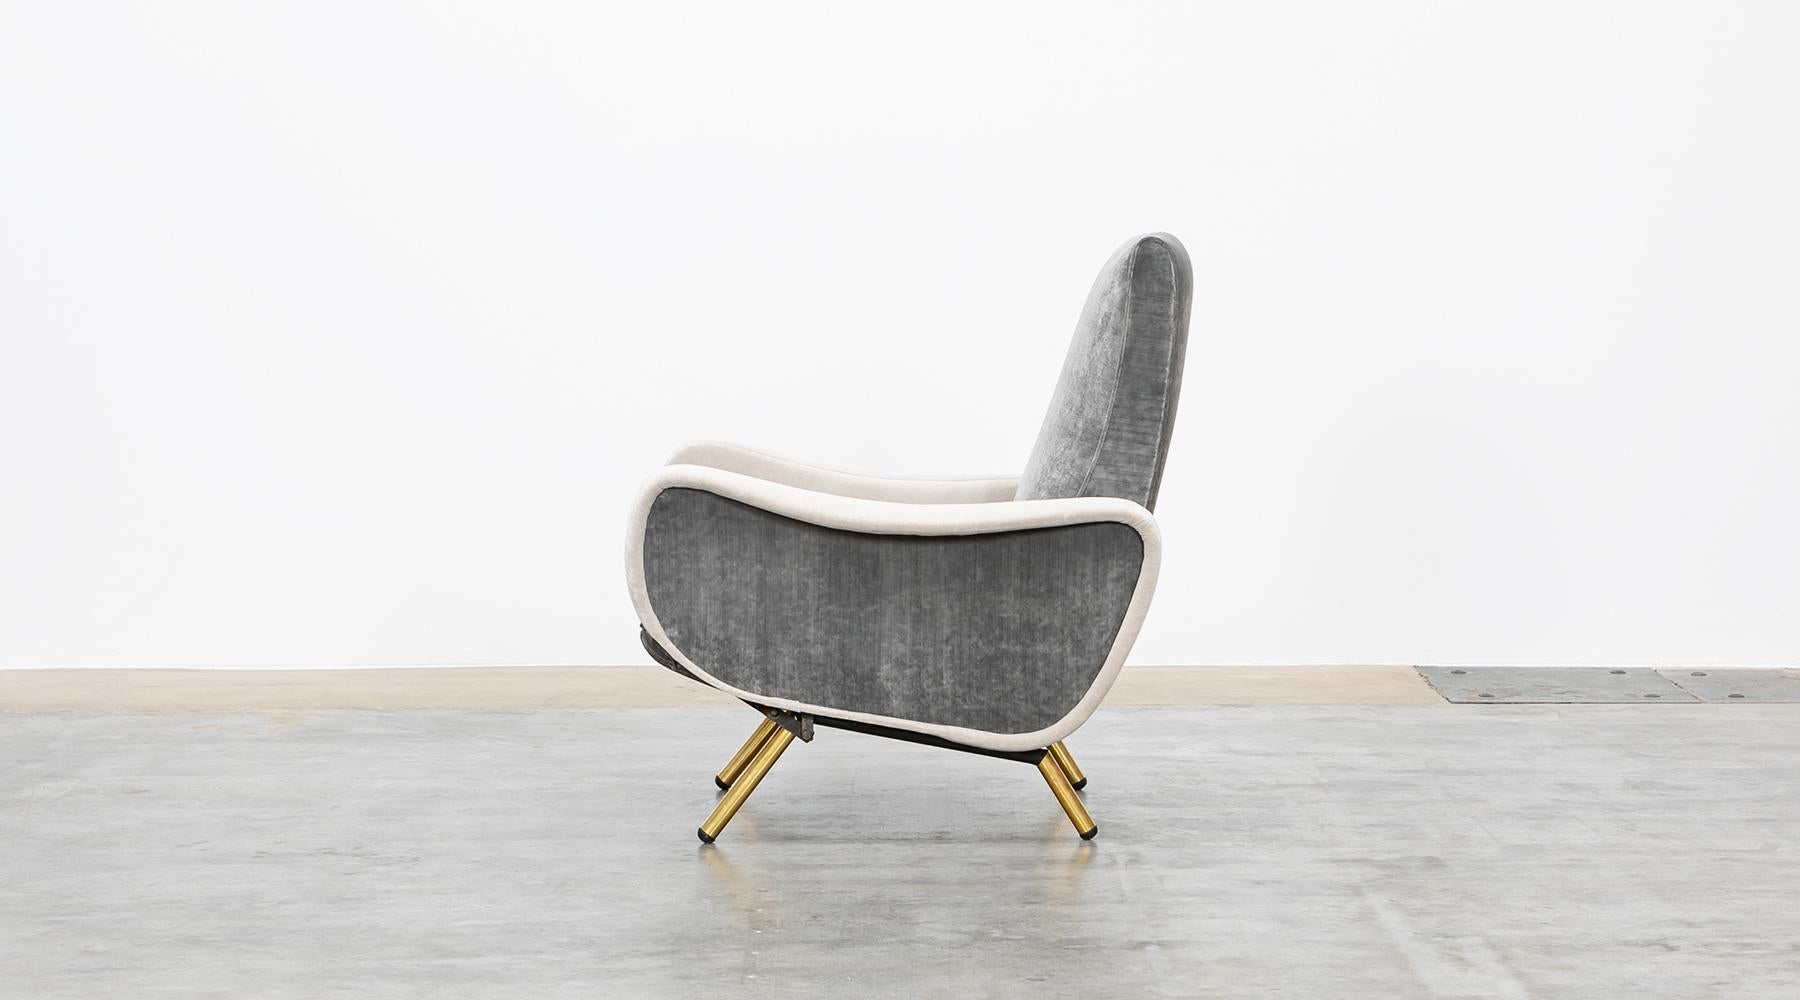 Fabric 1950s New Upholstery in Grey, Brass Legs, Pair of Lounge Chairs by Marco Zanuso